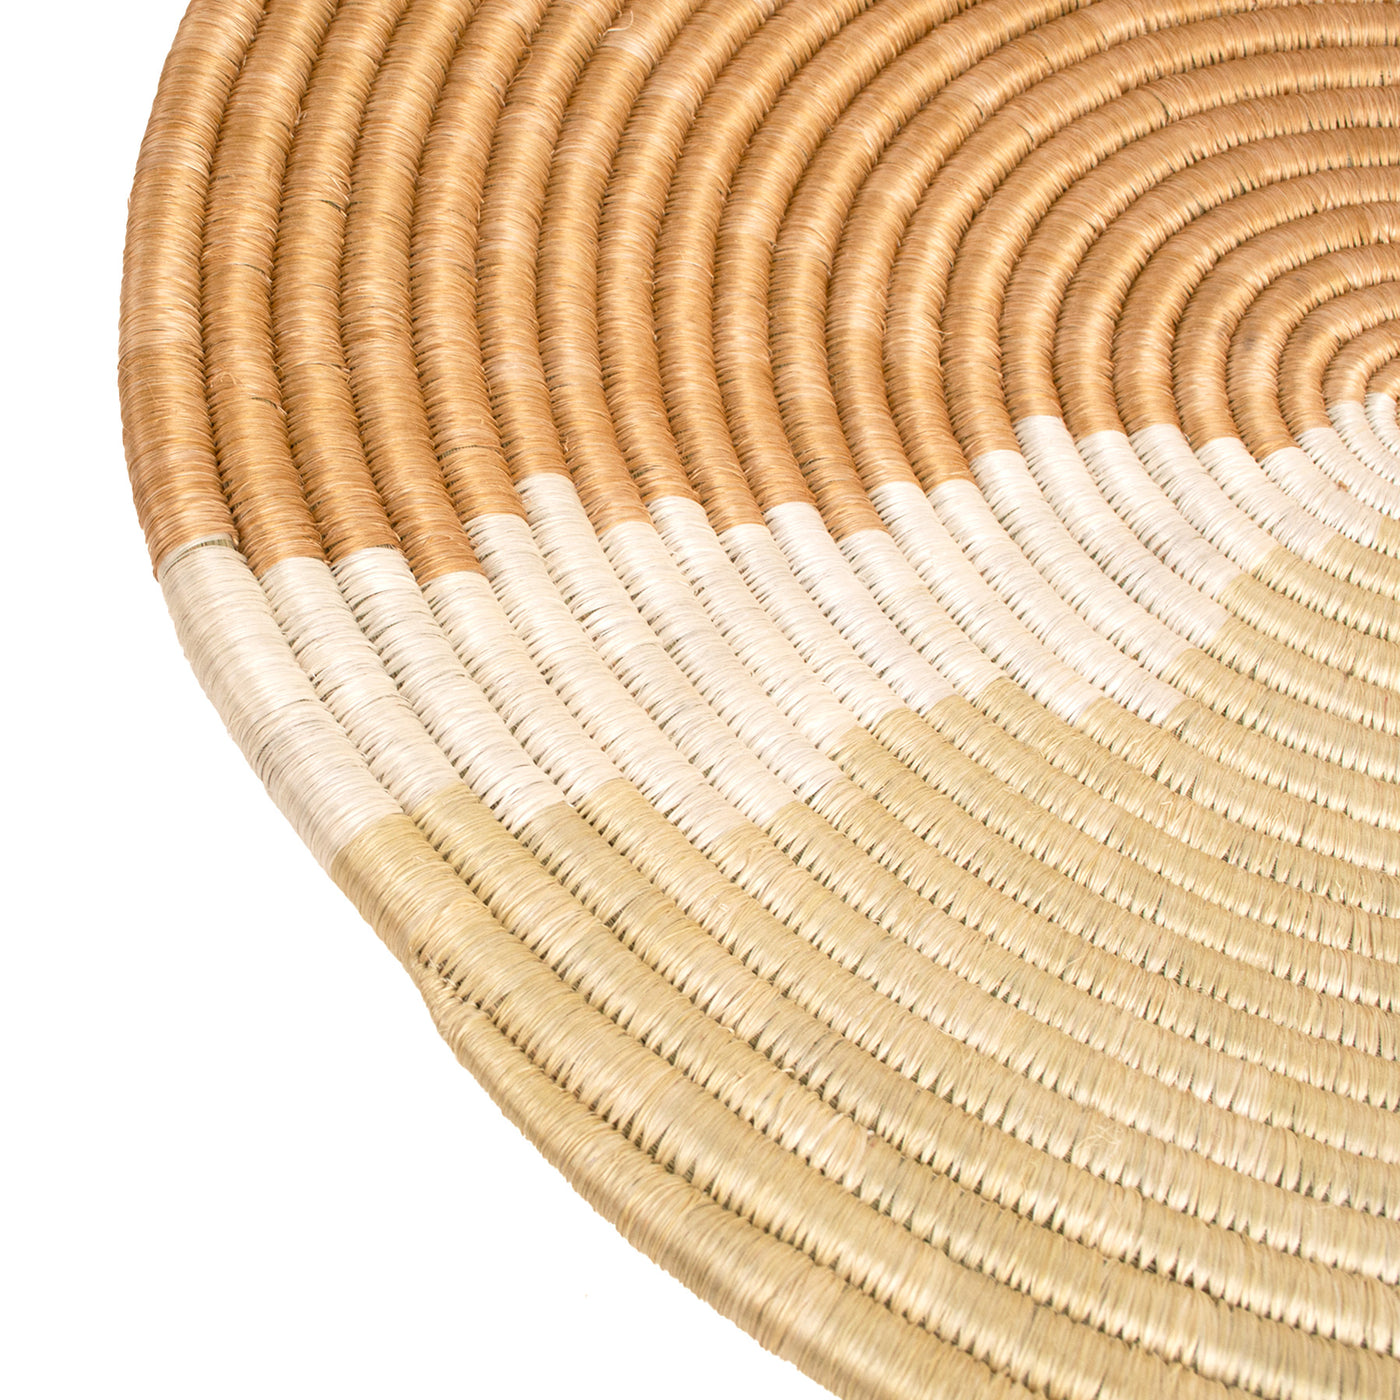 Sand Woven Bowl - 21" Refined